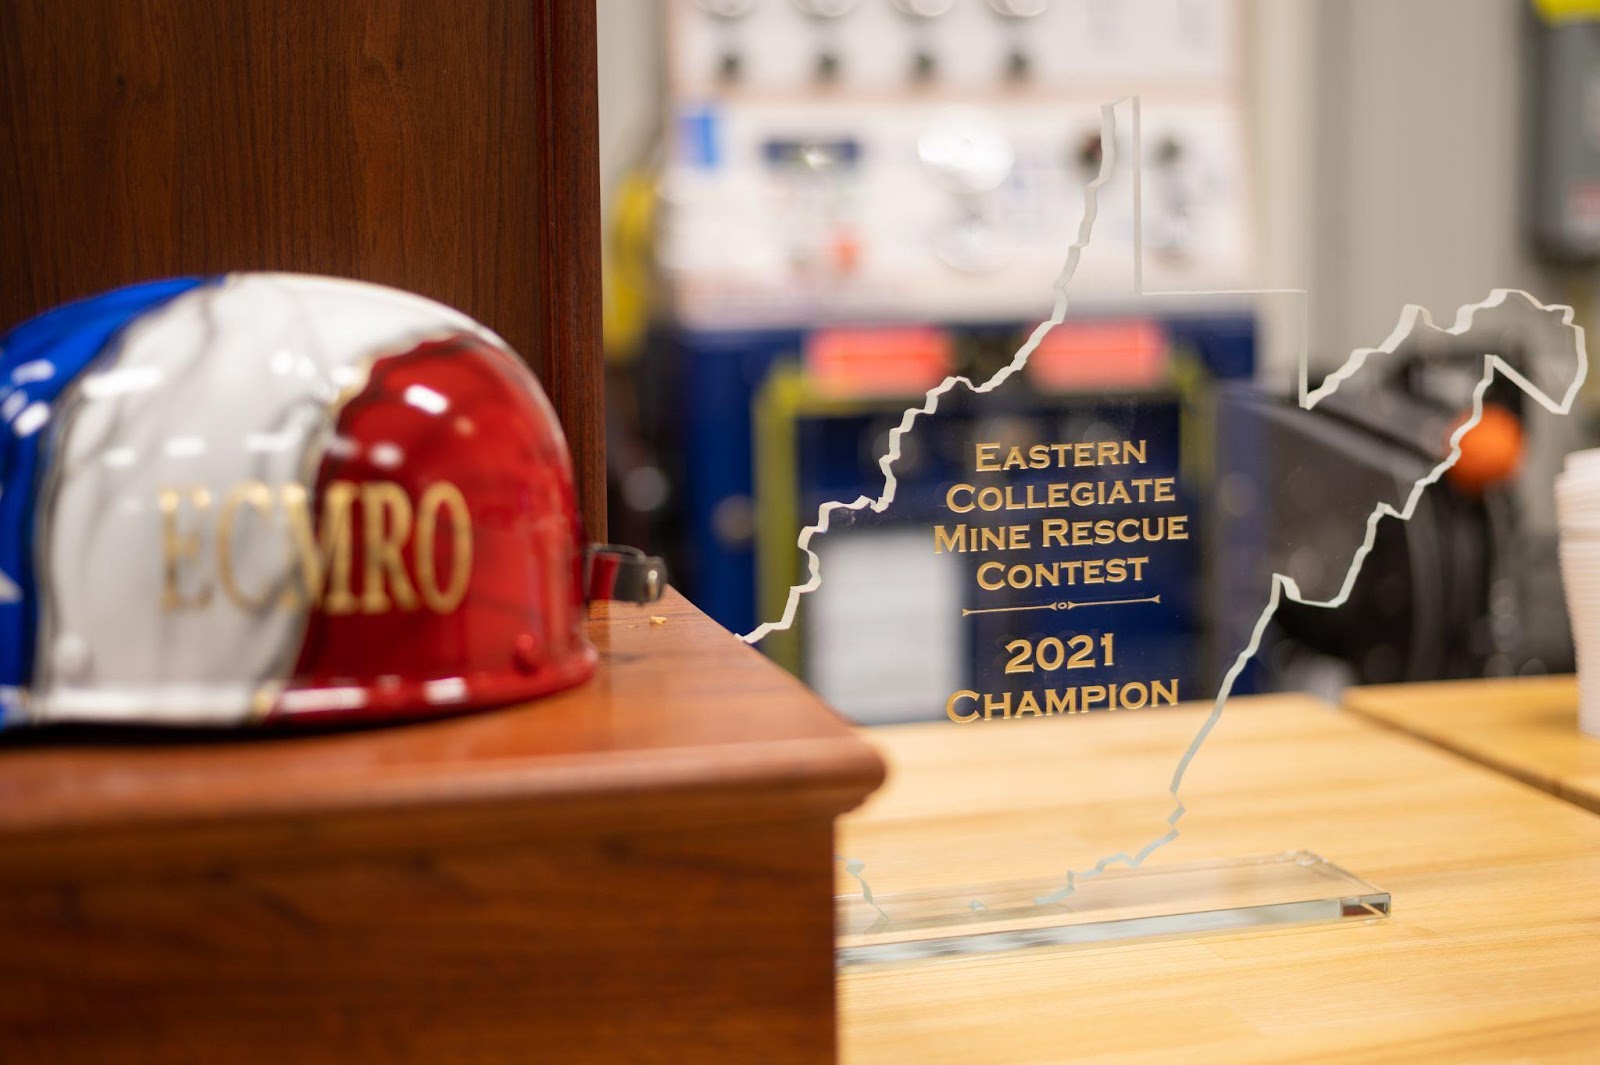 2021 Eastern Collegiate Mine Rescue Contest showcases student mining skills at the West Virginia Training and Conference Center